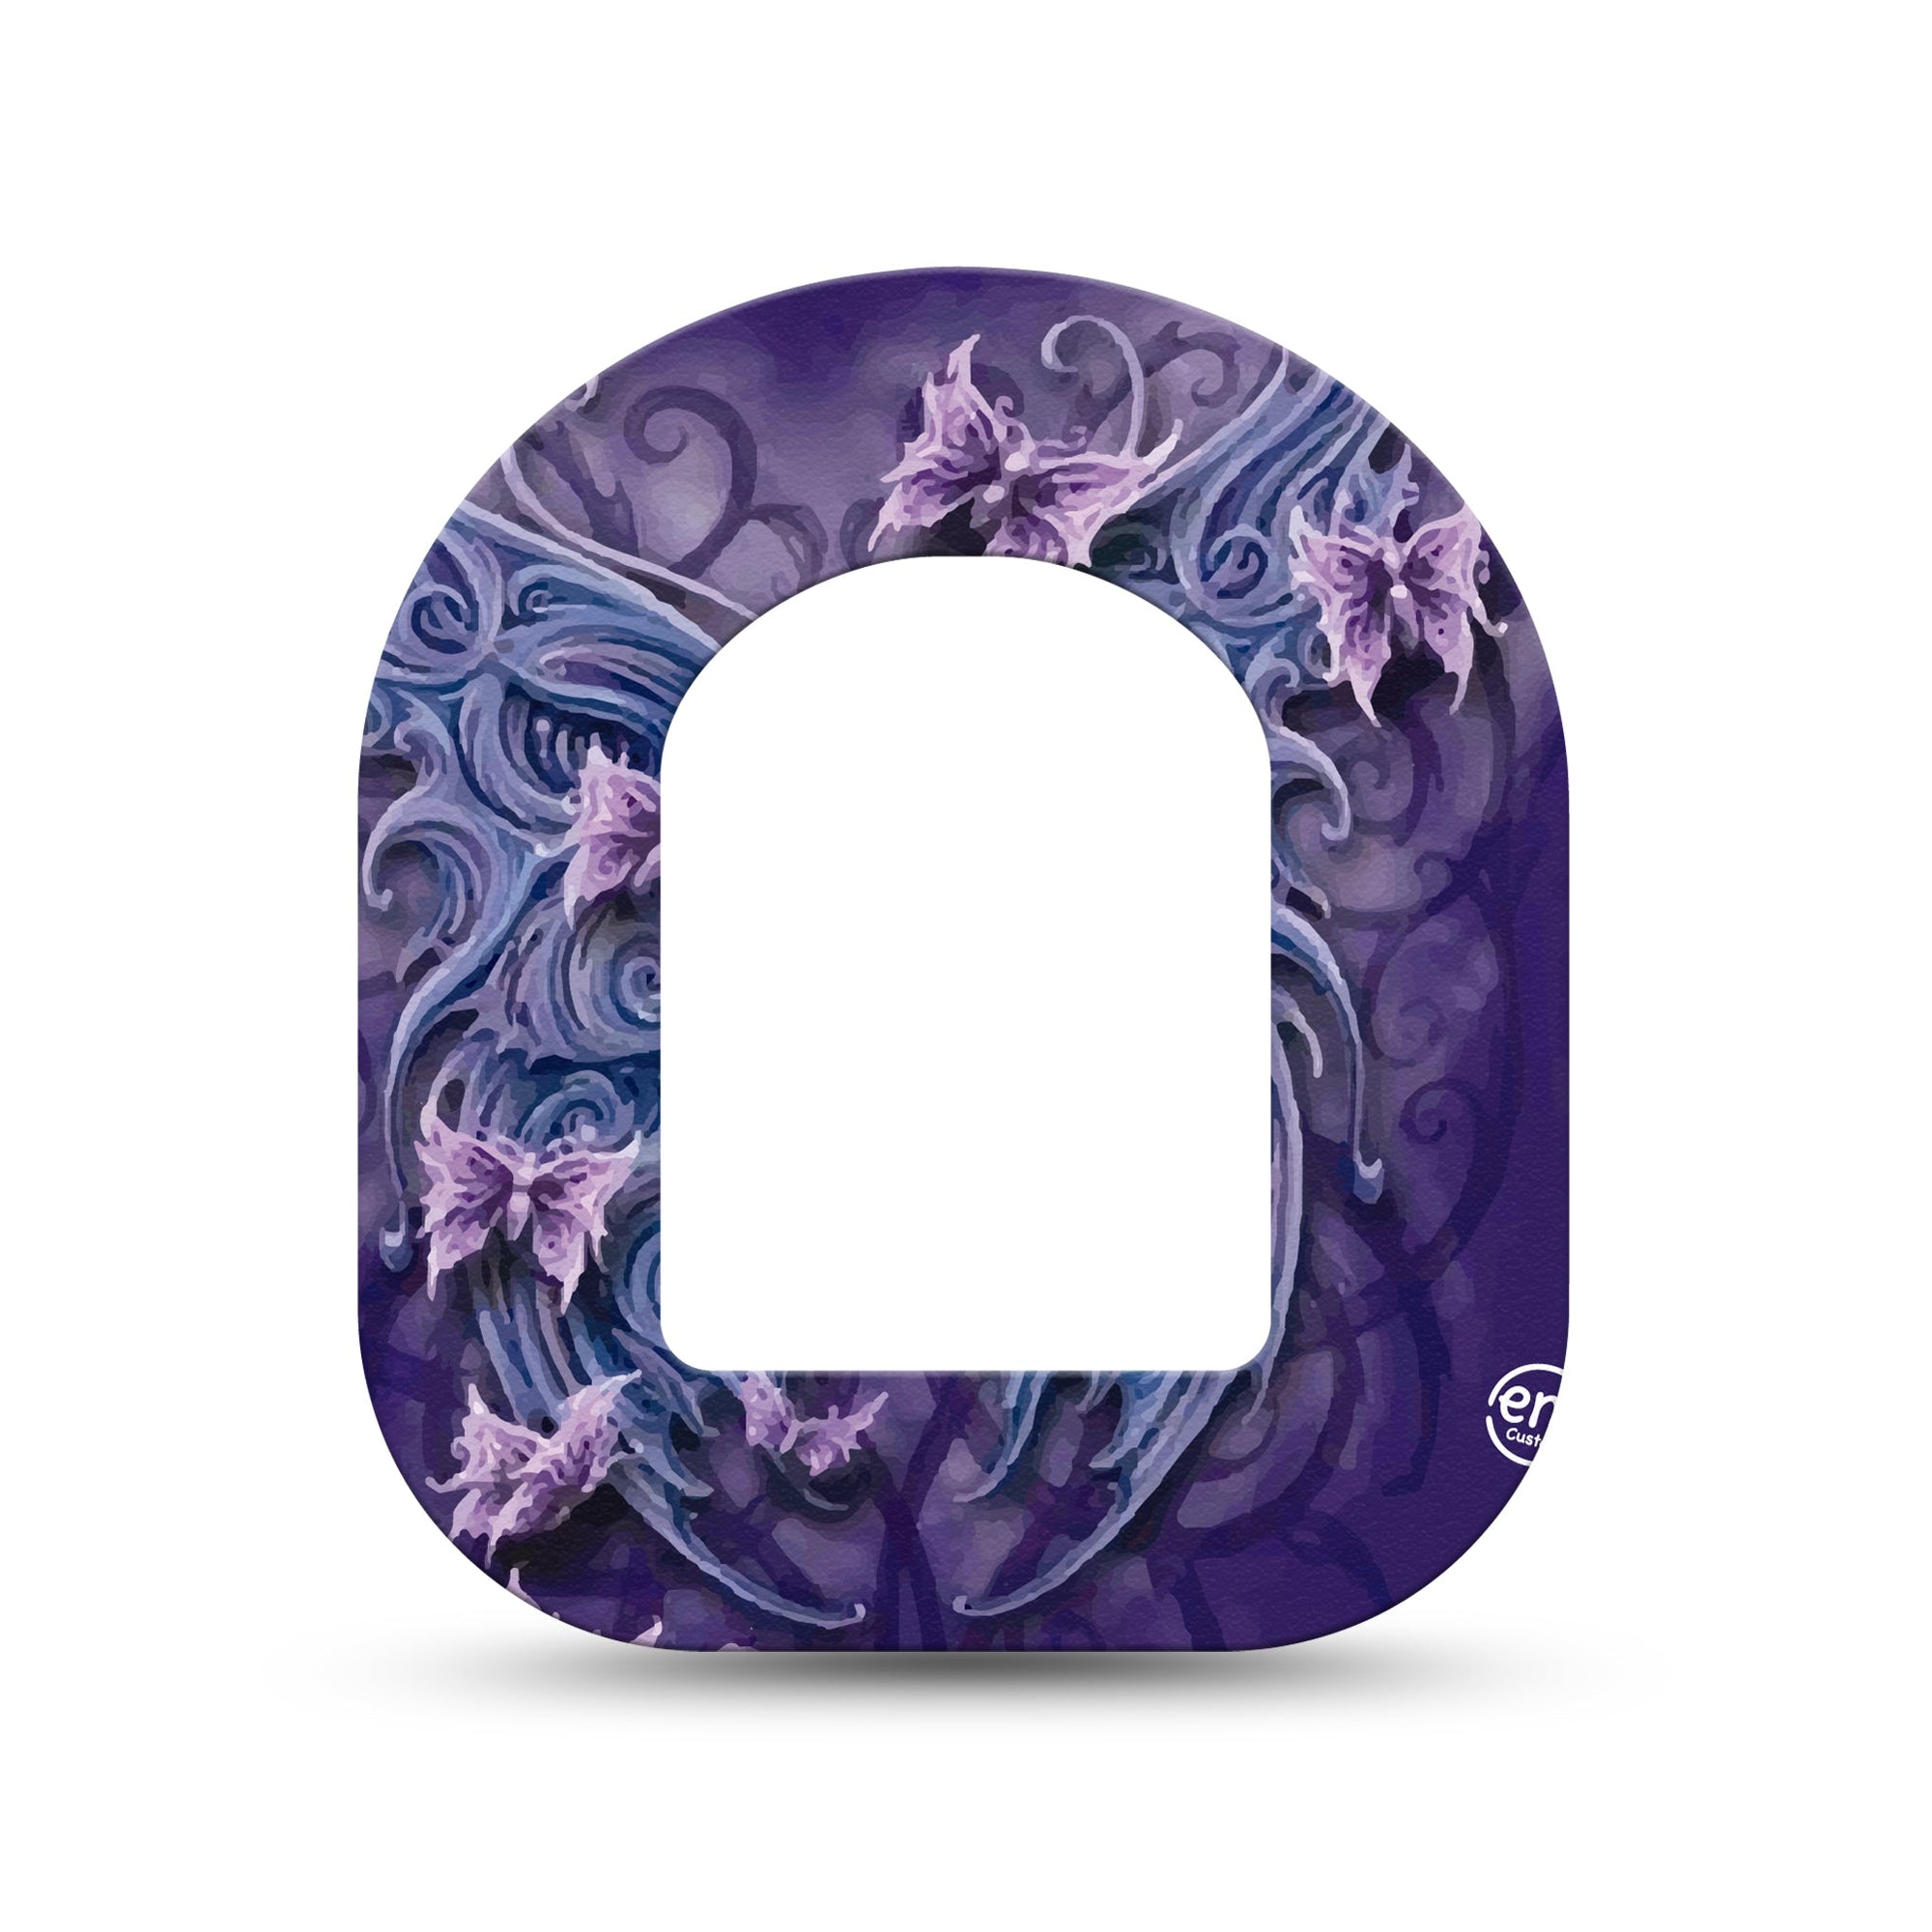 ExpressionMed Purple Butterfly Pod Mini Tape Single, Violet Winged Beauty Overlay Patch Pump Design